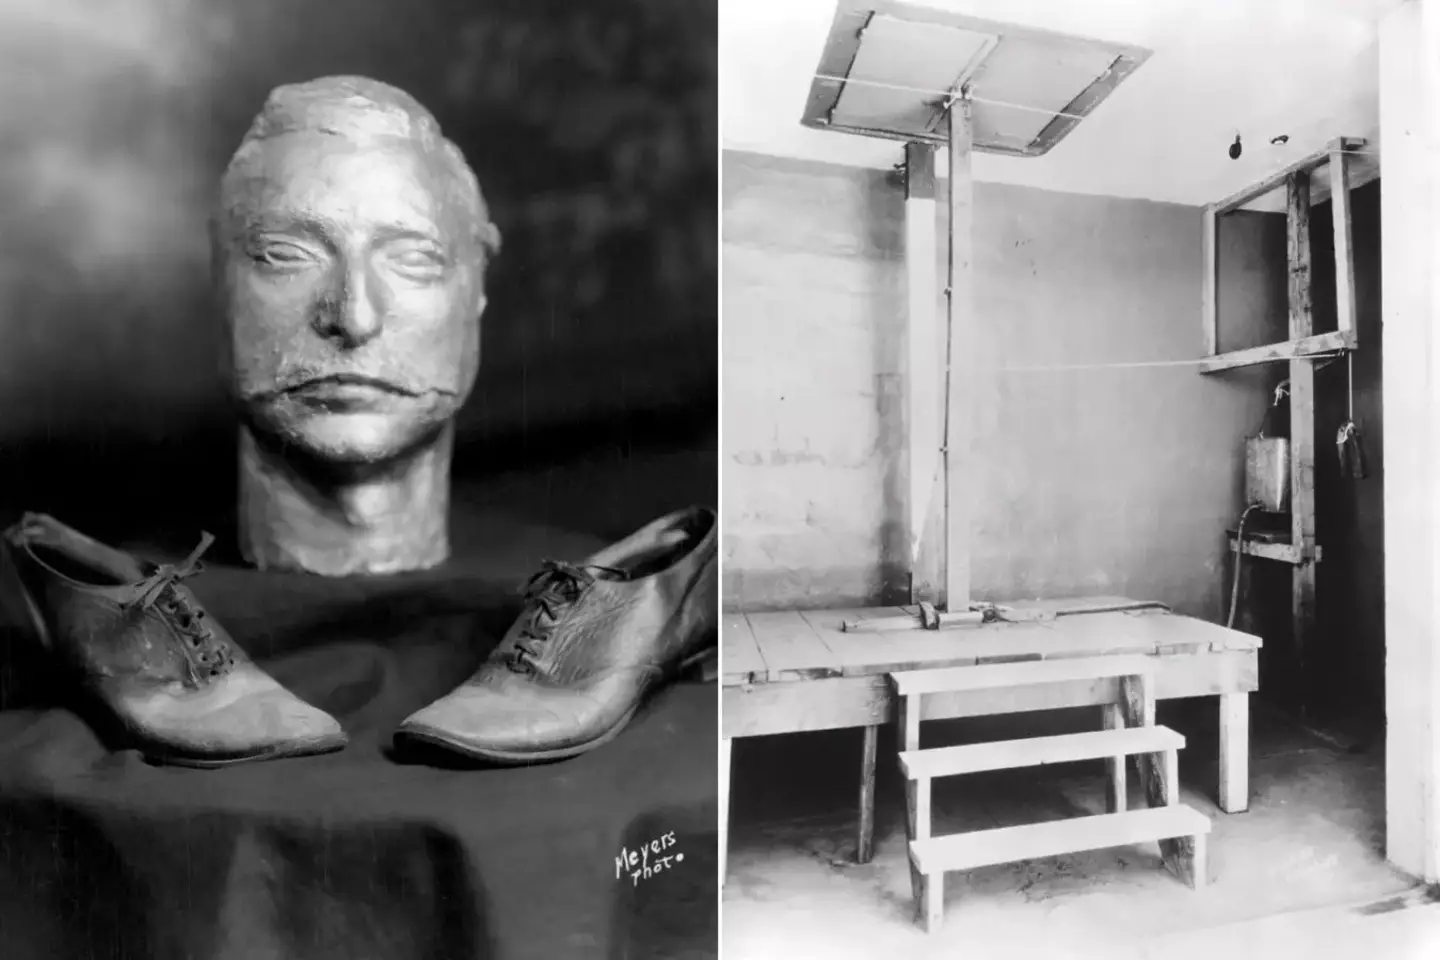 A death mask of George Parrott, as well as the gallows he was hanged on and some shoes made of his skin.